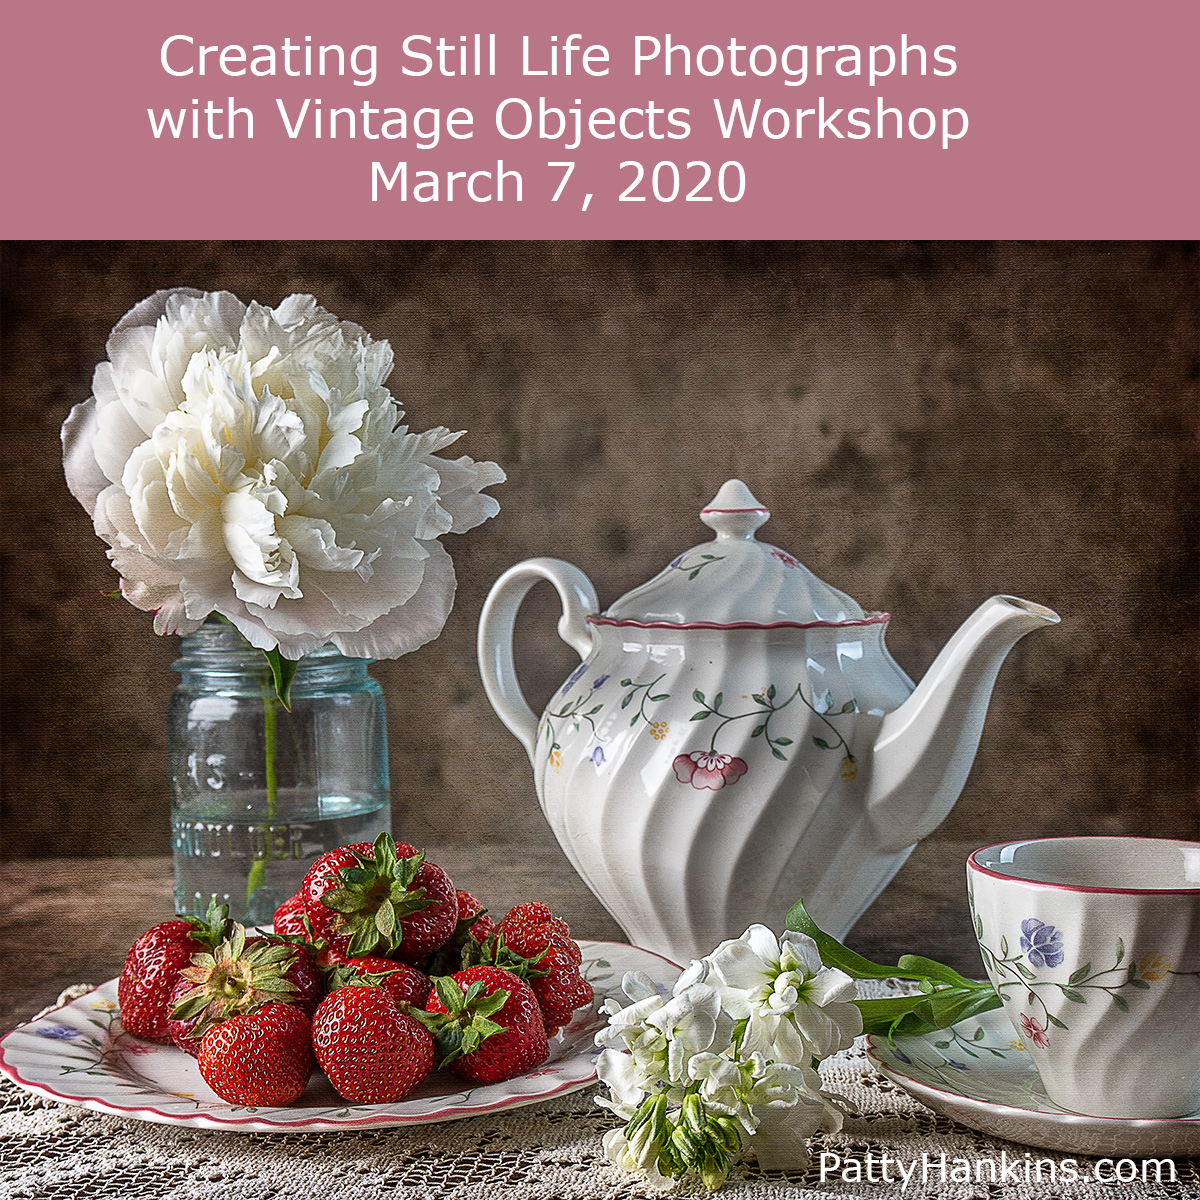 It’s Not Too Late To Join Me to Create Still Lifes With Vintage Objects on March 7